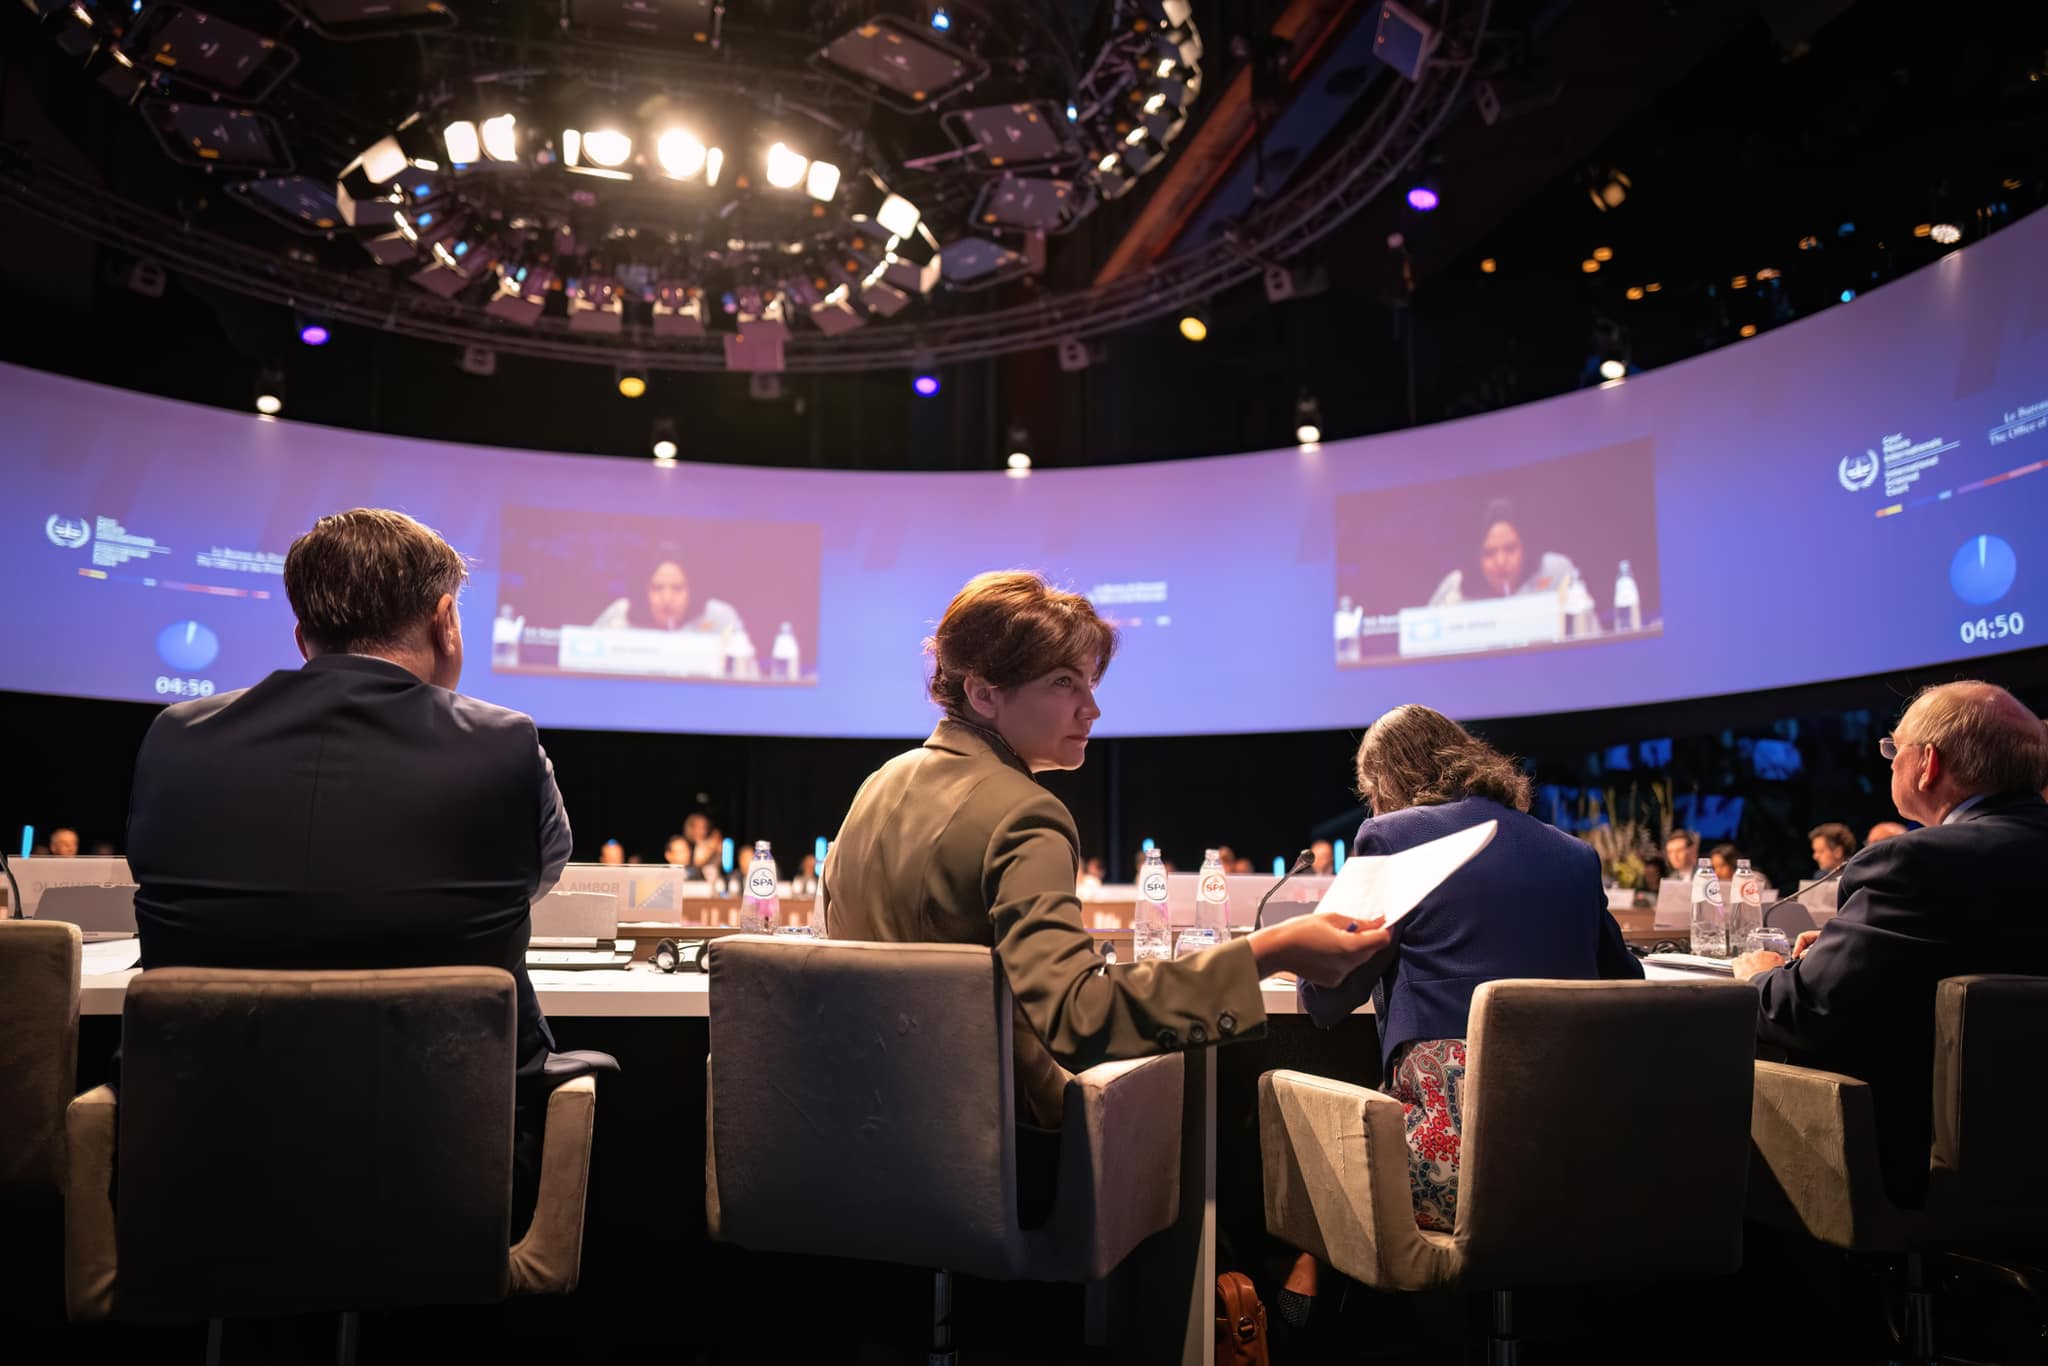 The Dialogue Group on Responsibility for Ukraine was created in The Hague